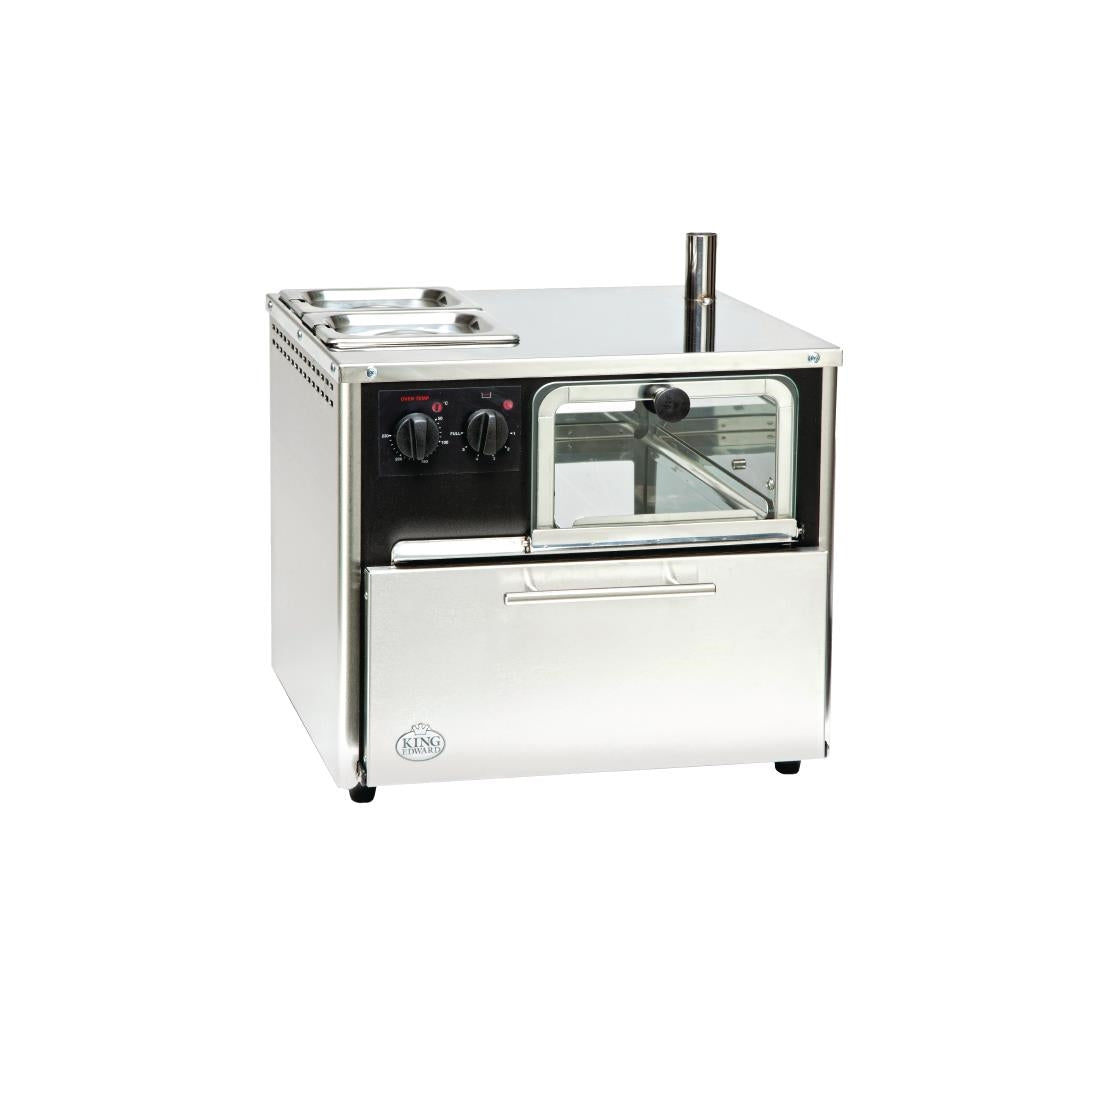 King Edward Compact Lite Oven Stainless Steel COMPLITE/SS.Product Ref:00675.Model:COMPLITE/SS. 🚚 3-5 Days Delivery